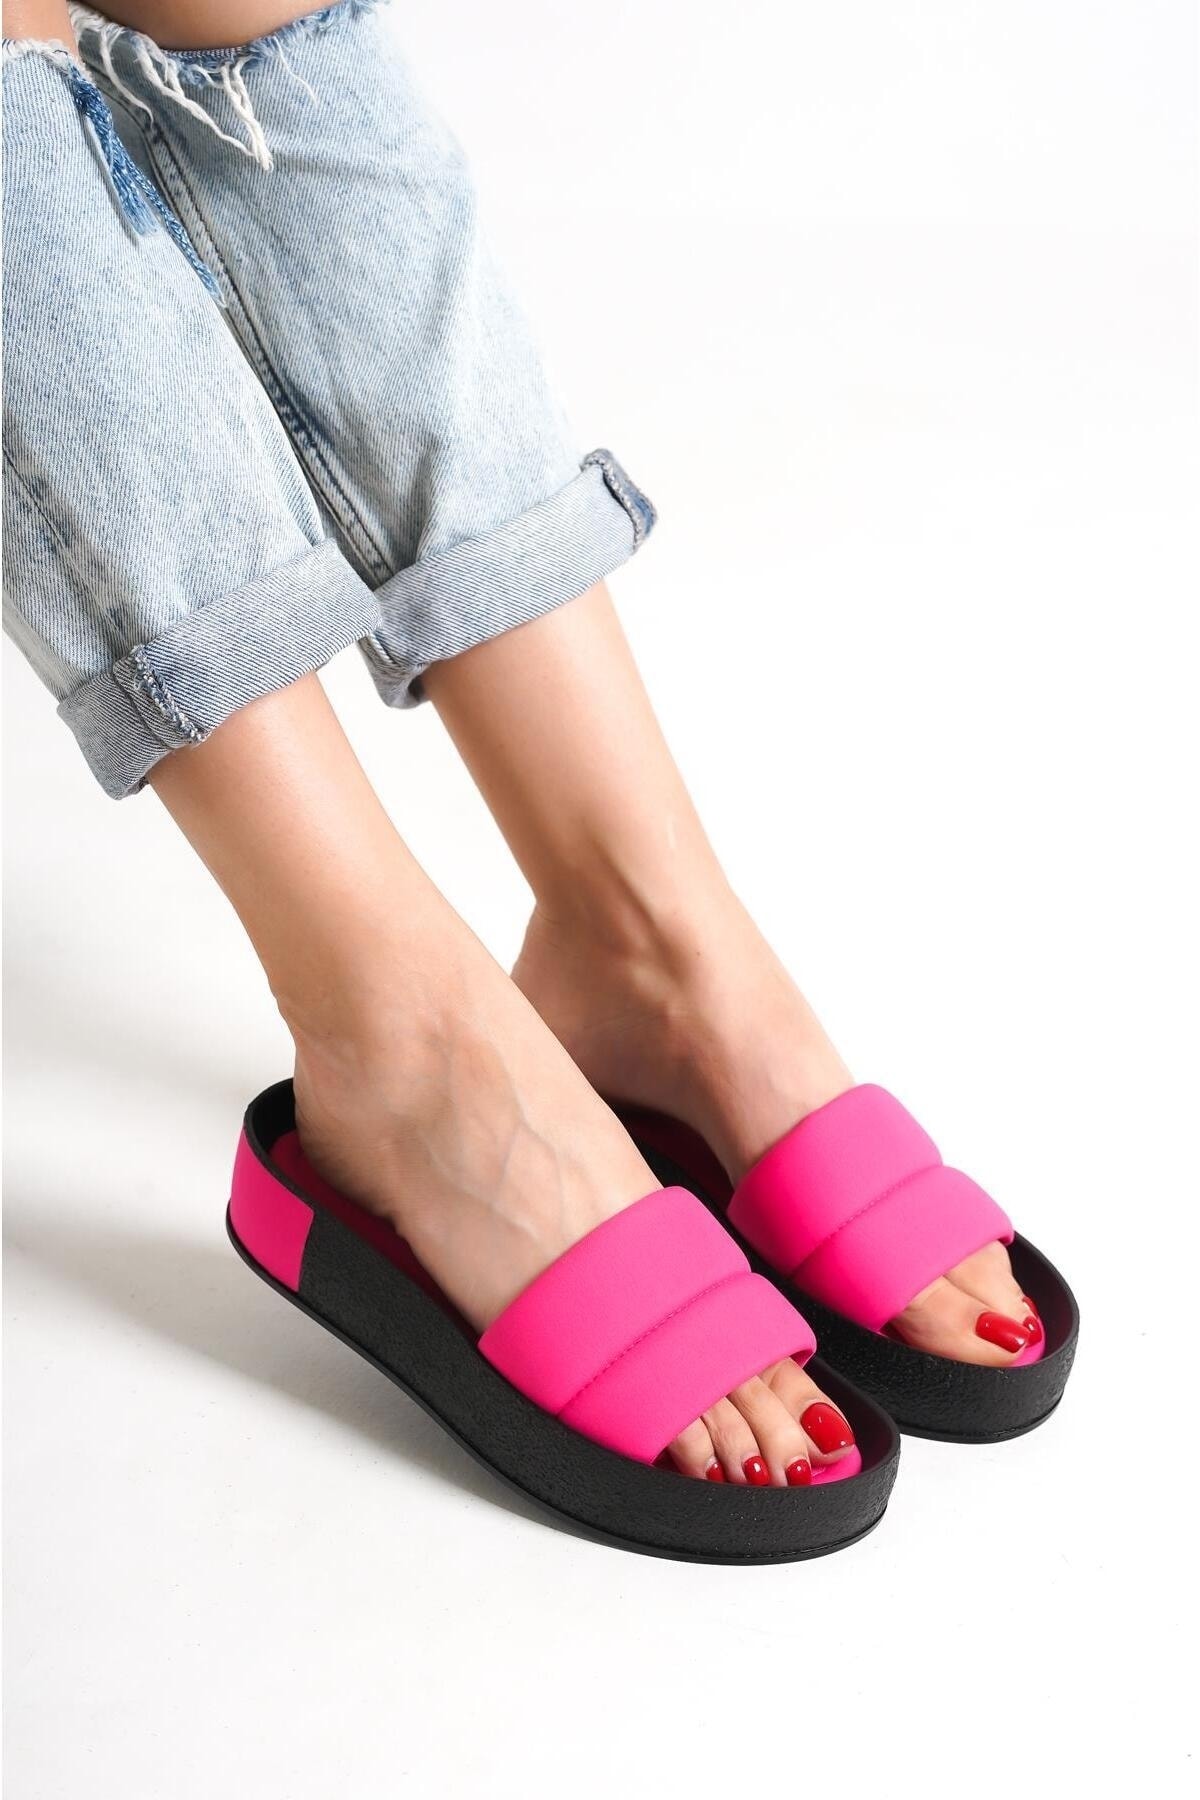 Capone Outfitters Capone Quilted Strap, Colorful Detailed Wedge Heel Matte Satin Fuchsia Women's Slippers.